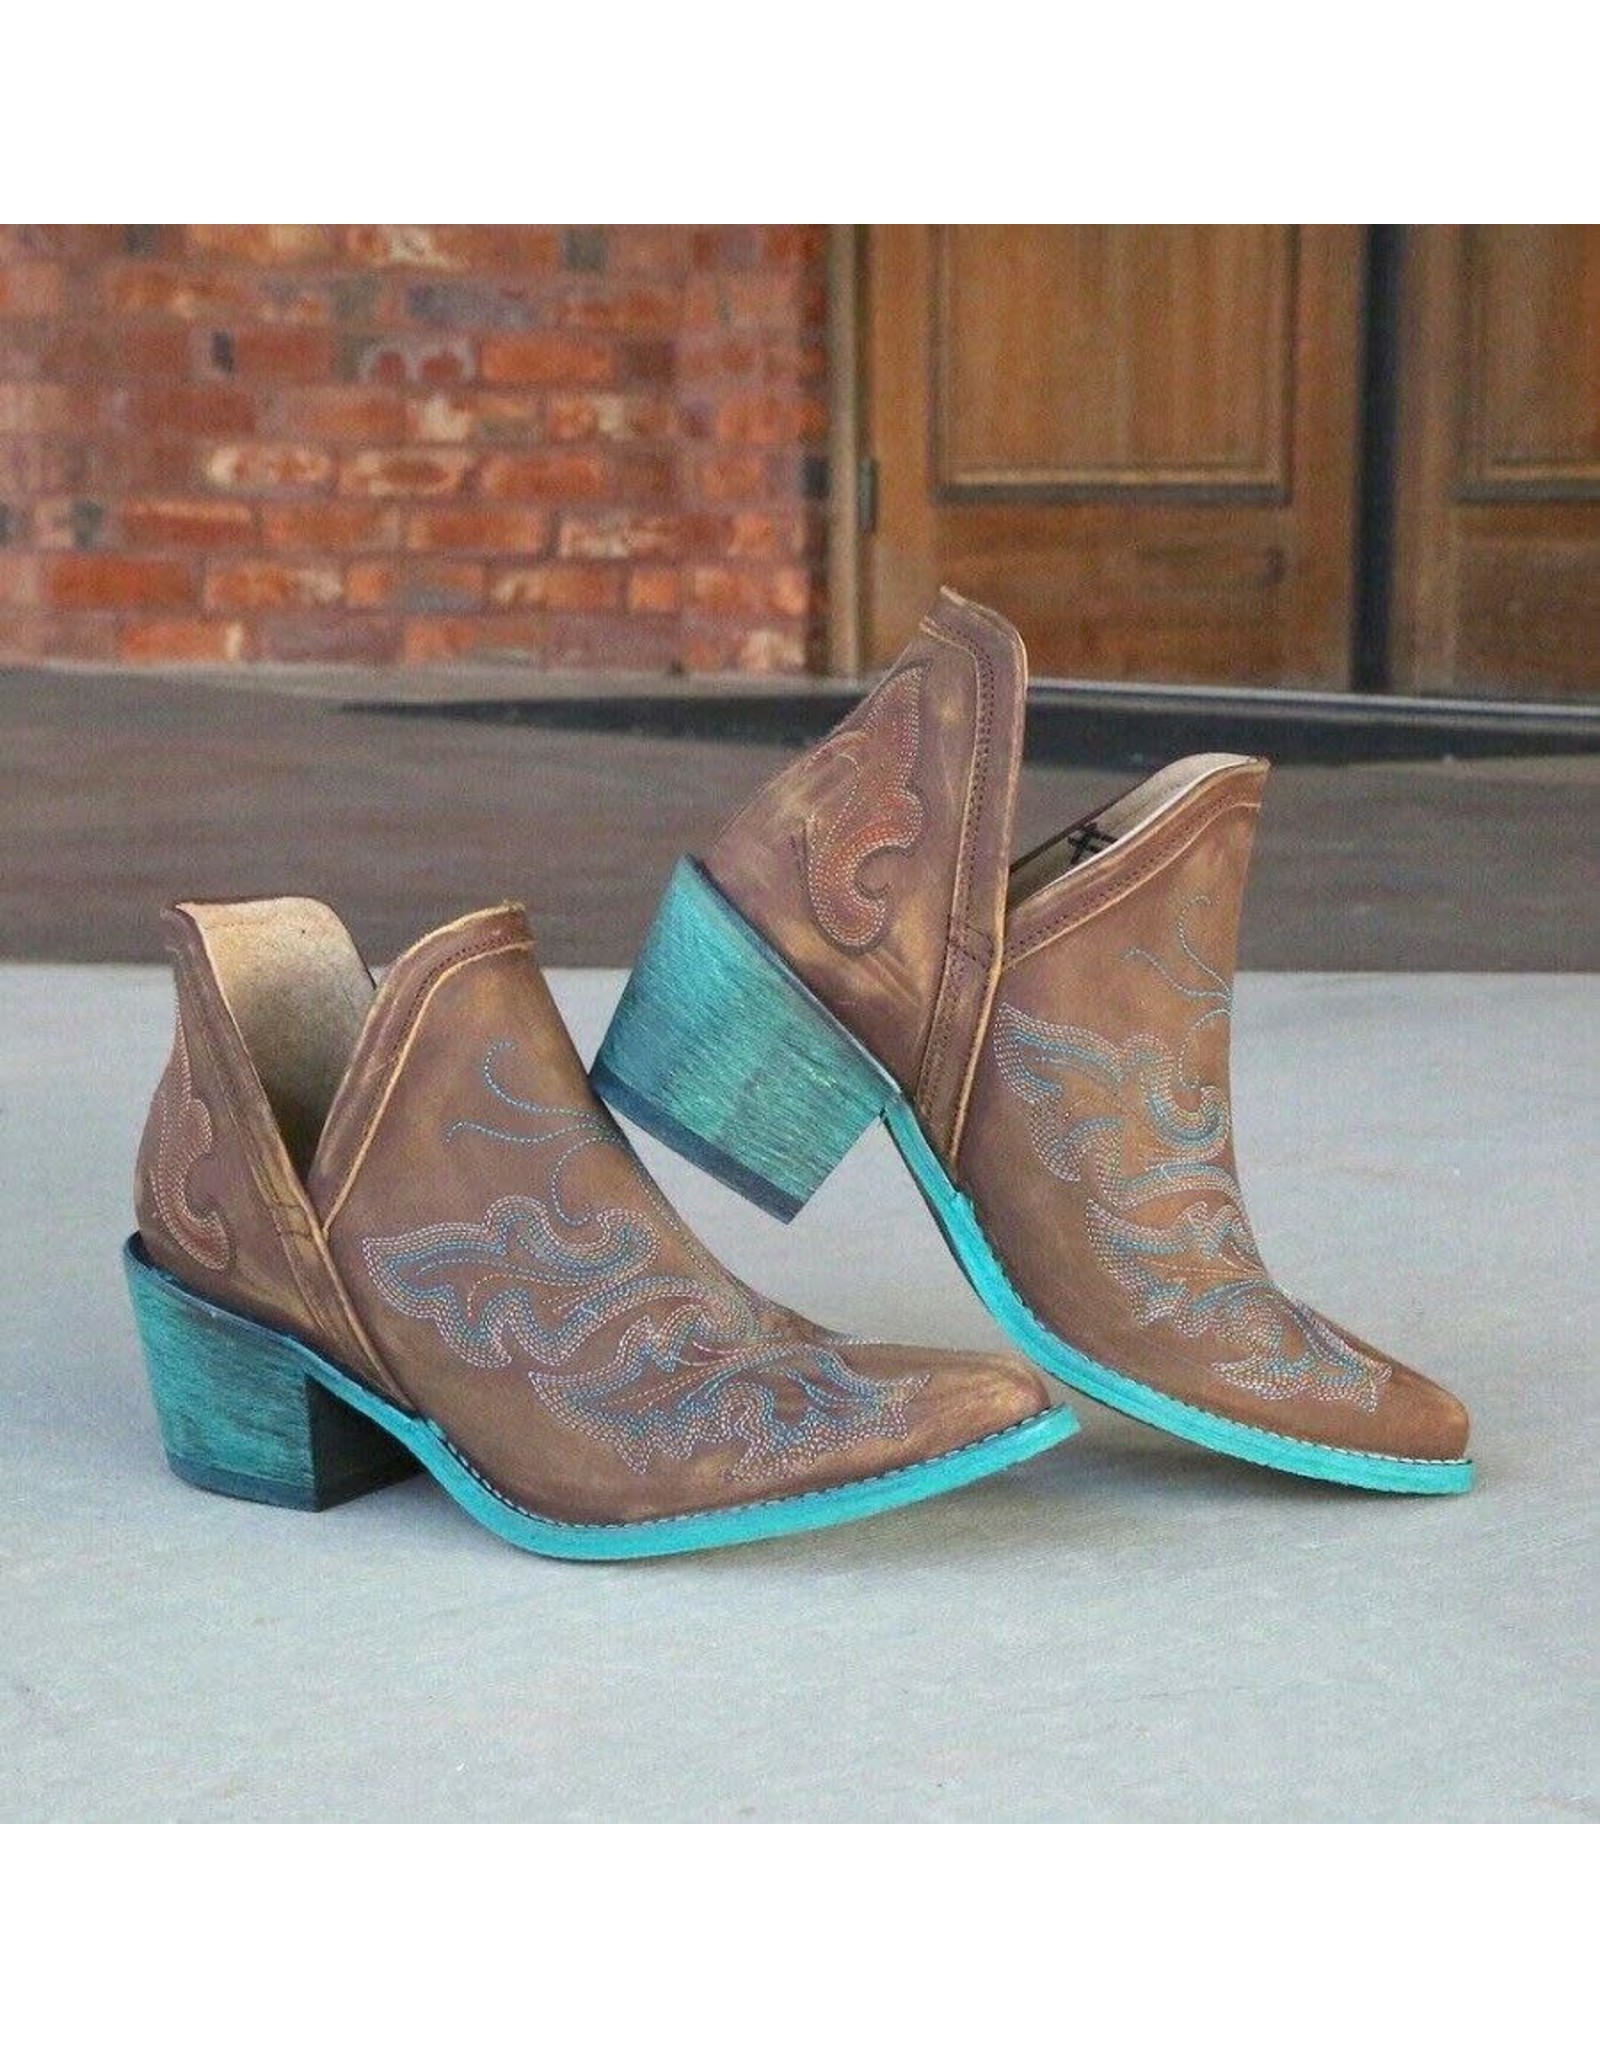 Circle G Ladies Cognac Turquoise Q0099 Embroidered Booties